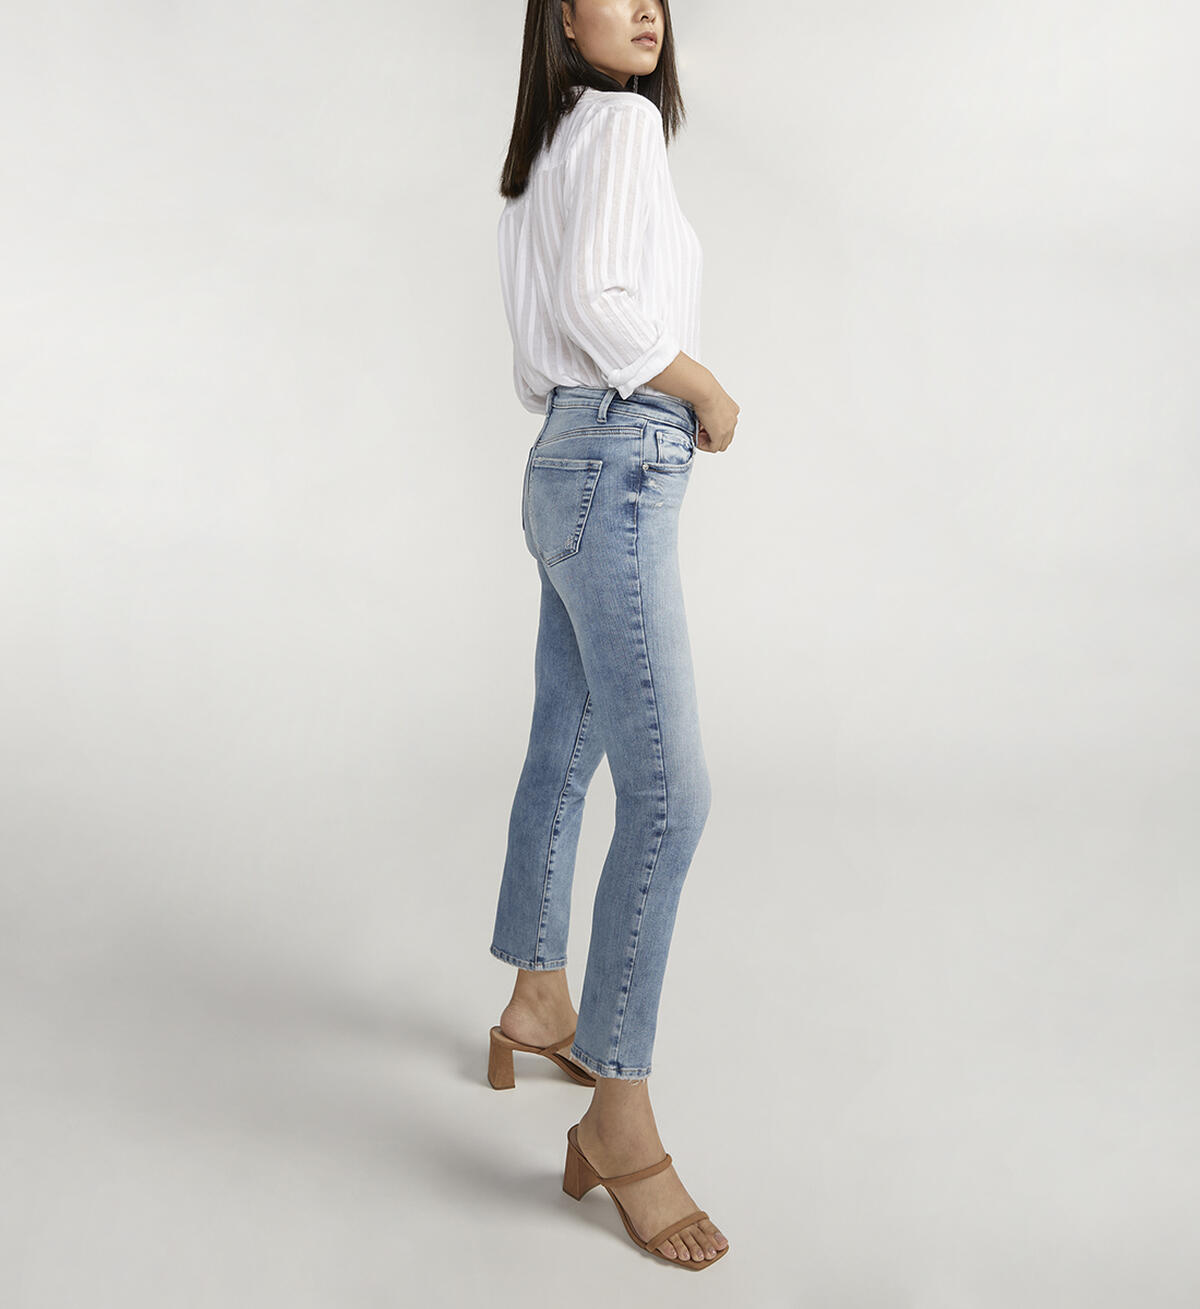 Isbister High Rise Straight Leg Jeans, , hi-res image number 2